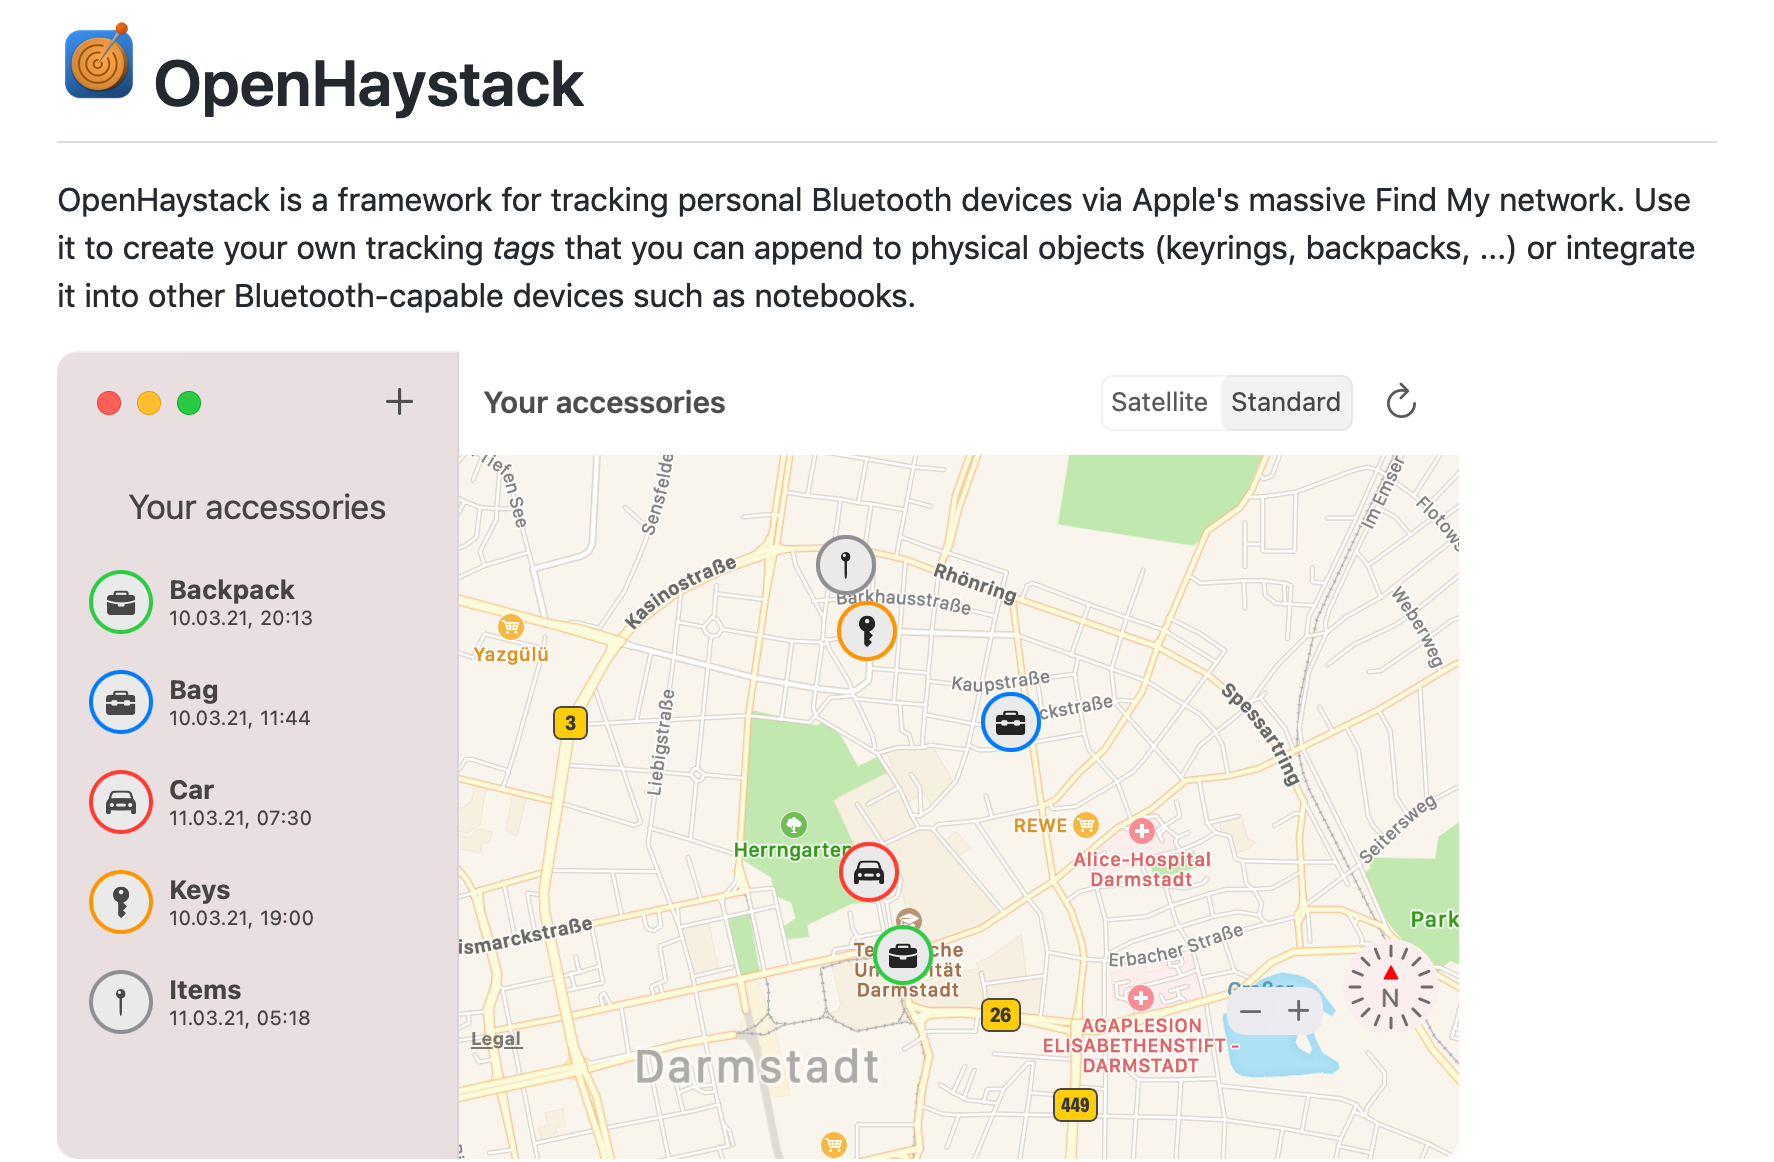 A screenshot of the user interface for the application OpenHaystack